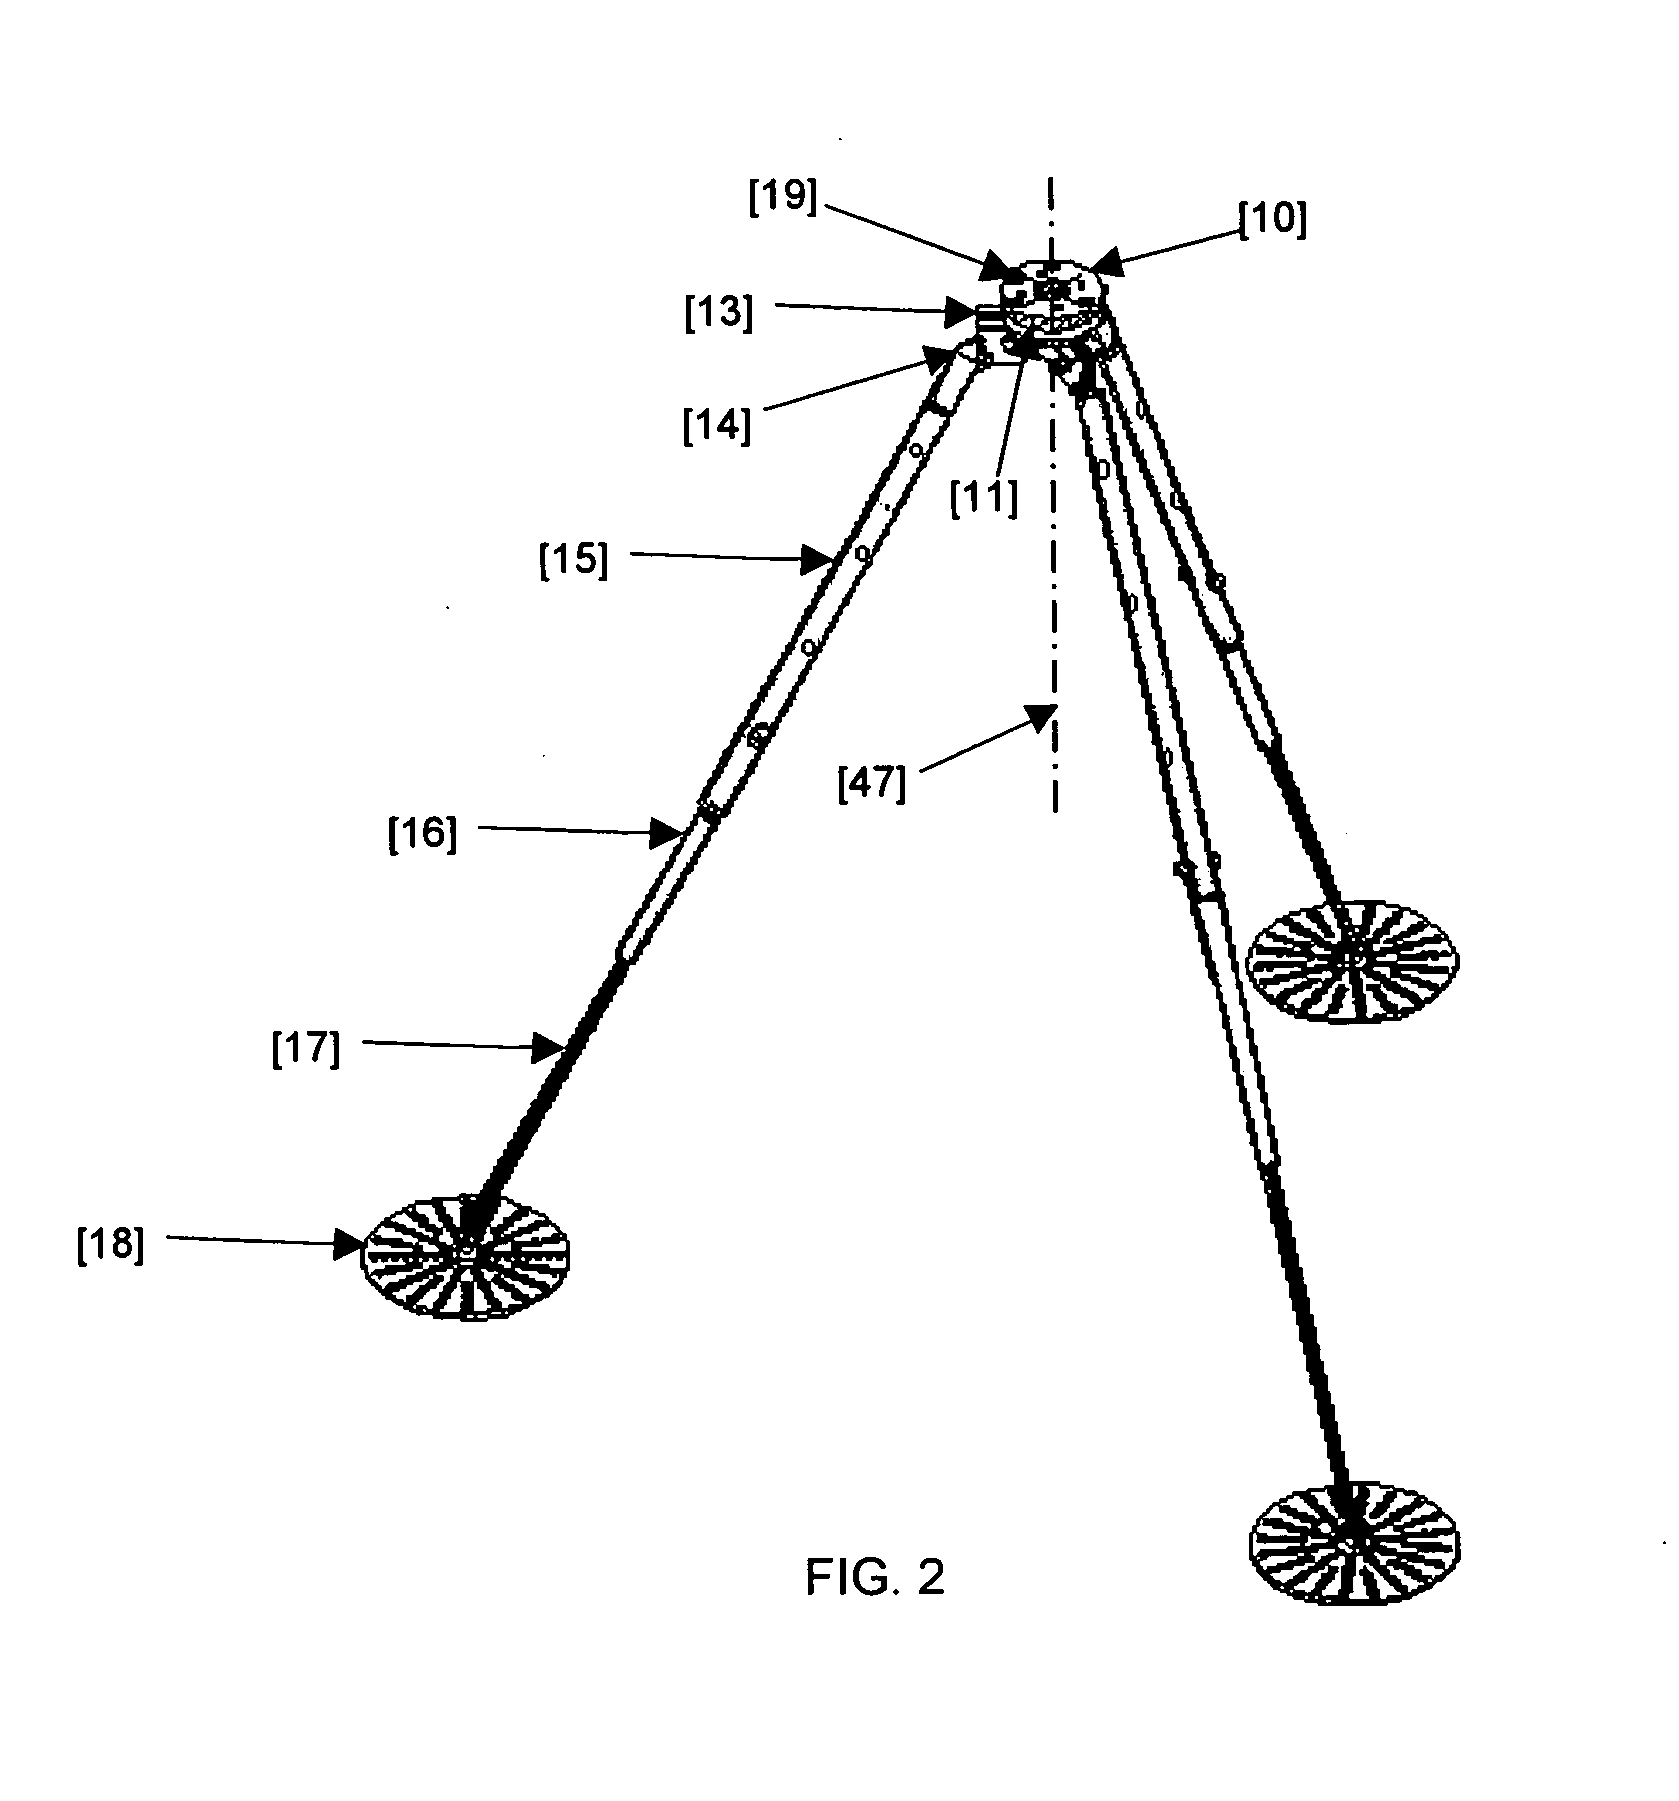 Adjustable tripod mechanism to support devices or transducers for scientific measurement